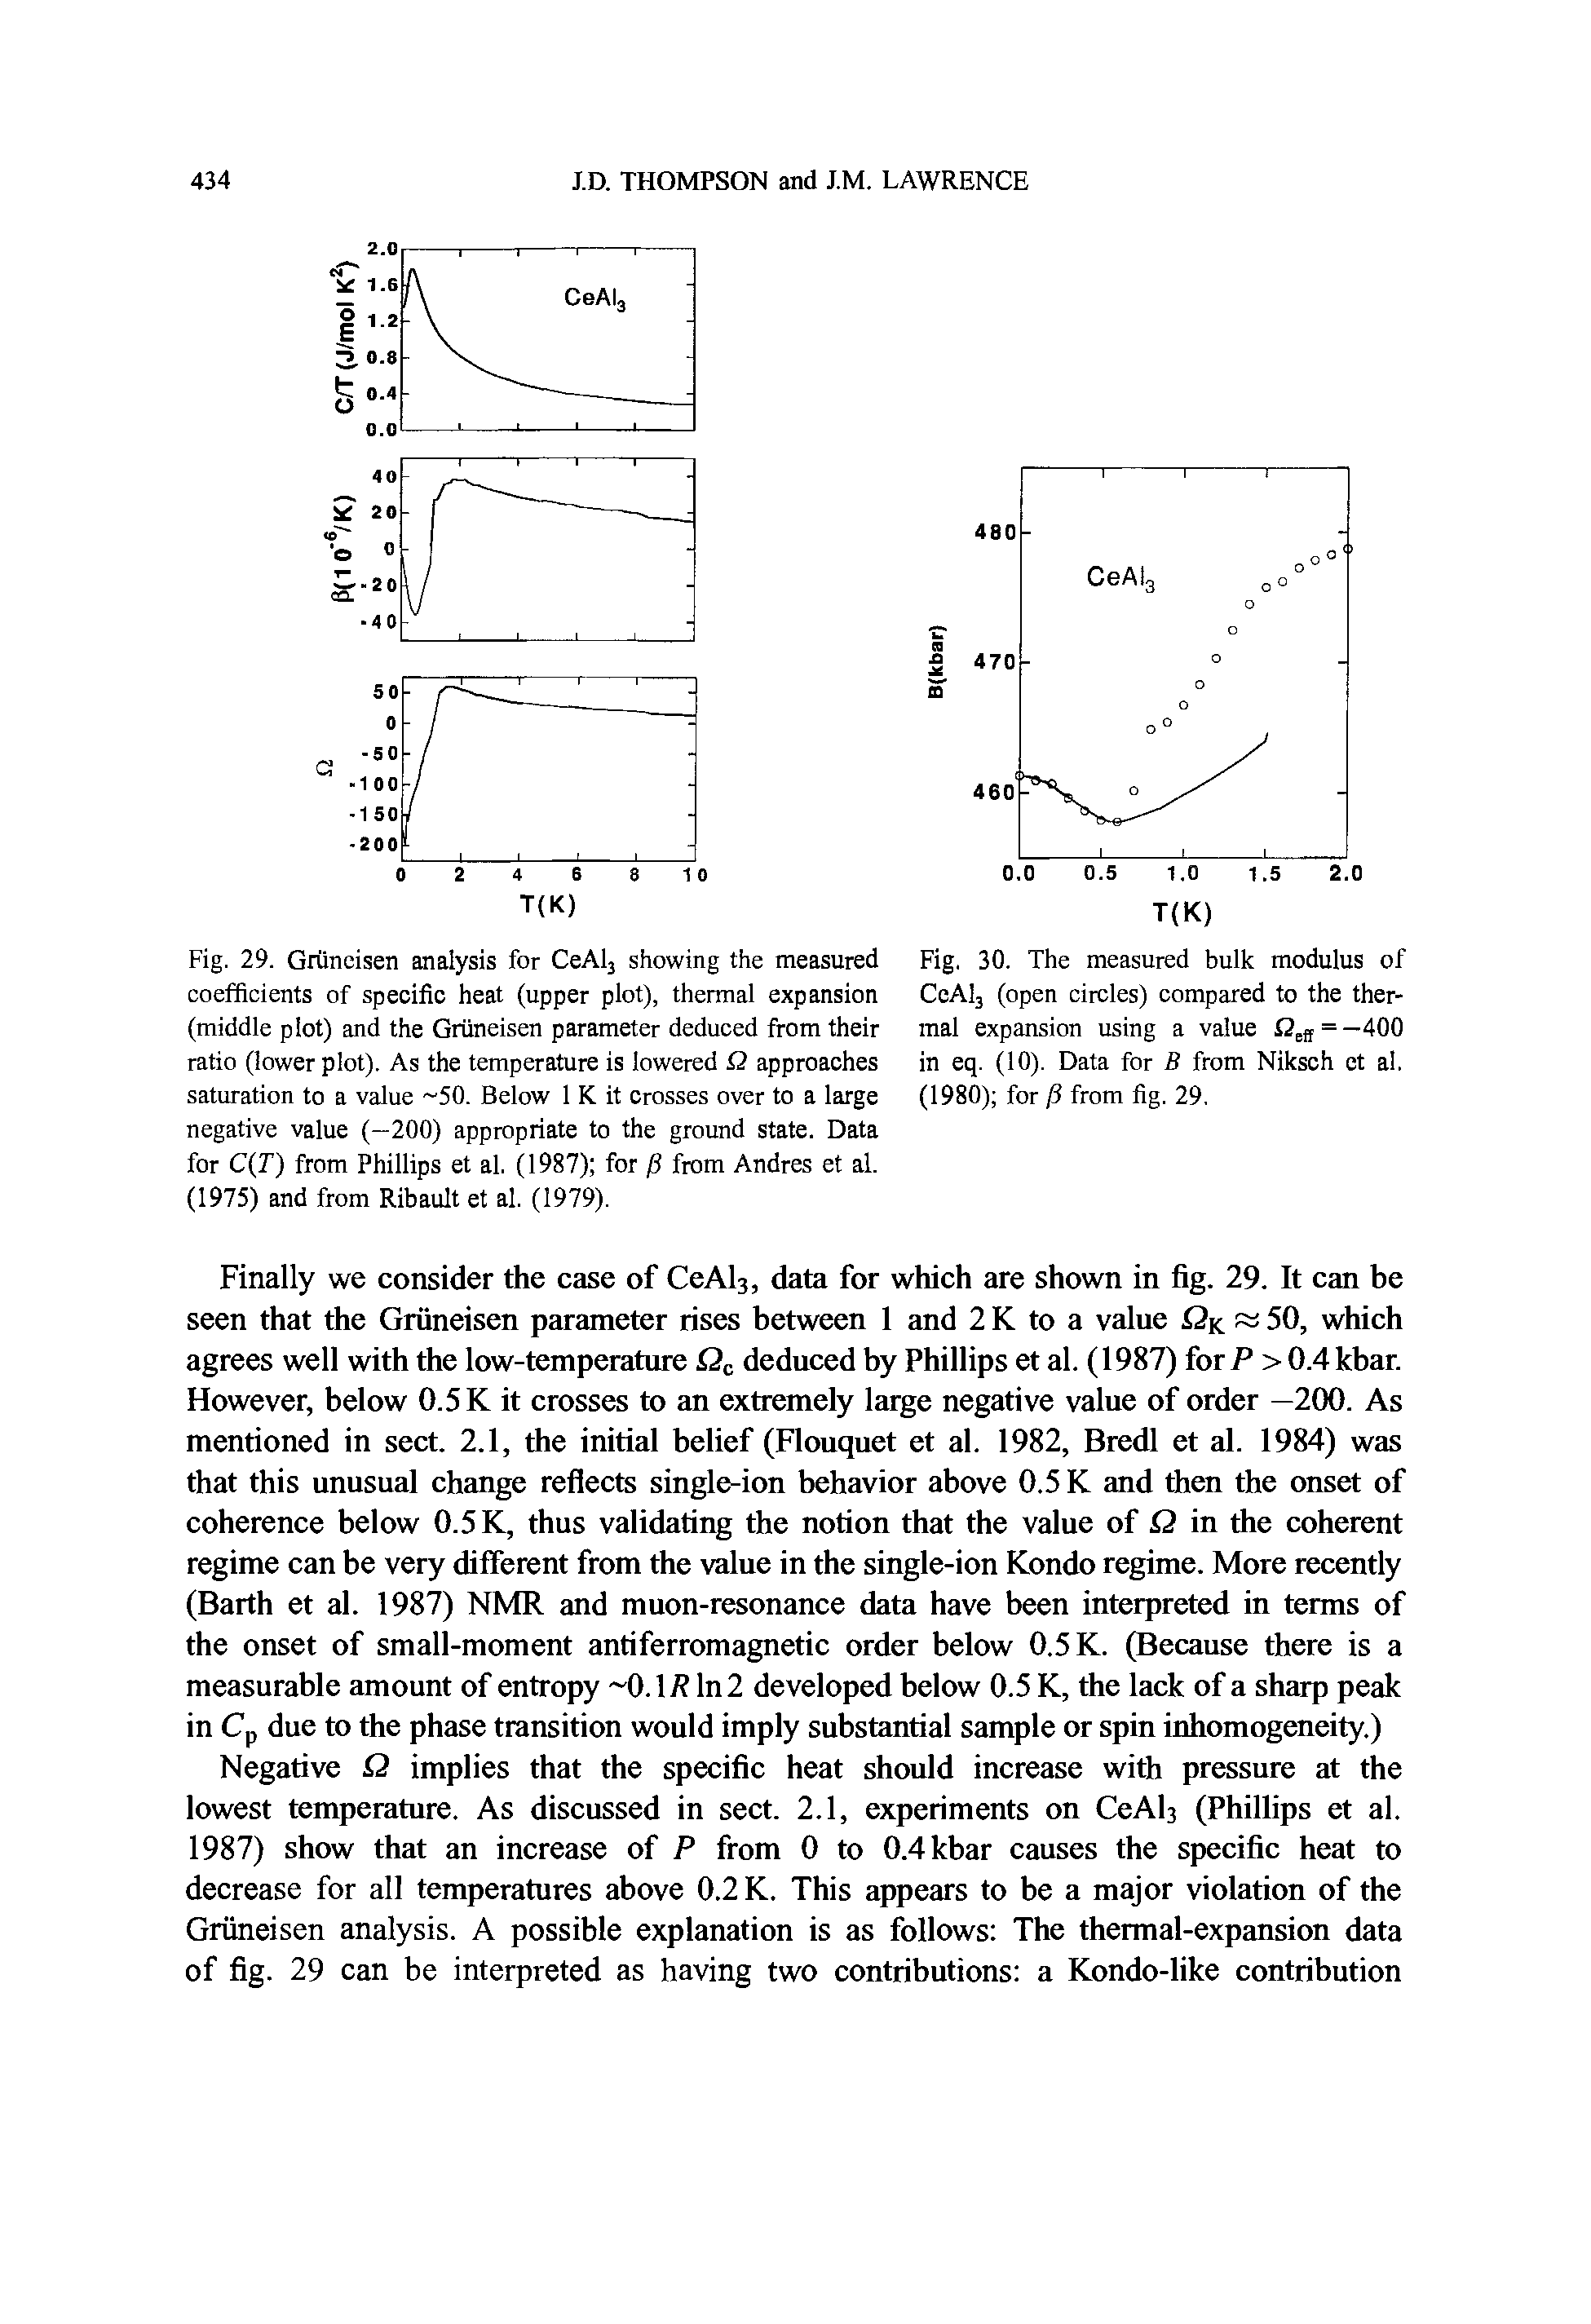 Fig. 29. GrUneisen analysis for CeAl3 showing the measured coefficients of specific heat (upper plot), thermal expansion (middle plot) and the Griineisen parameter deduced from their ratio (lower plot). As the temperature is lowered Q approaches saturation to a value 50. Below 1 K it Crosses over to a large negative value (-200) appropriate to the ground state. Data for C(T) from Phillips et al. (1987) for p from Andres et al. (1975) and from Ribault et al. (1979).